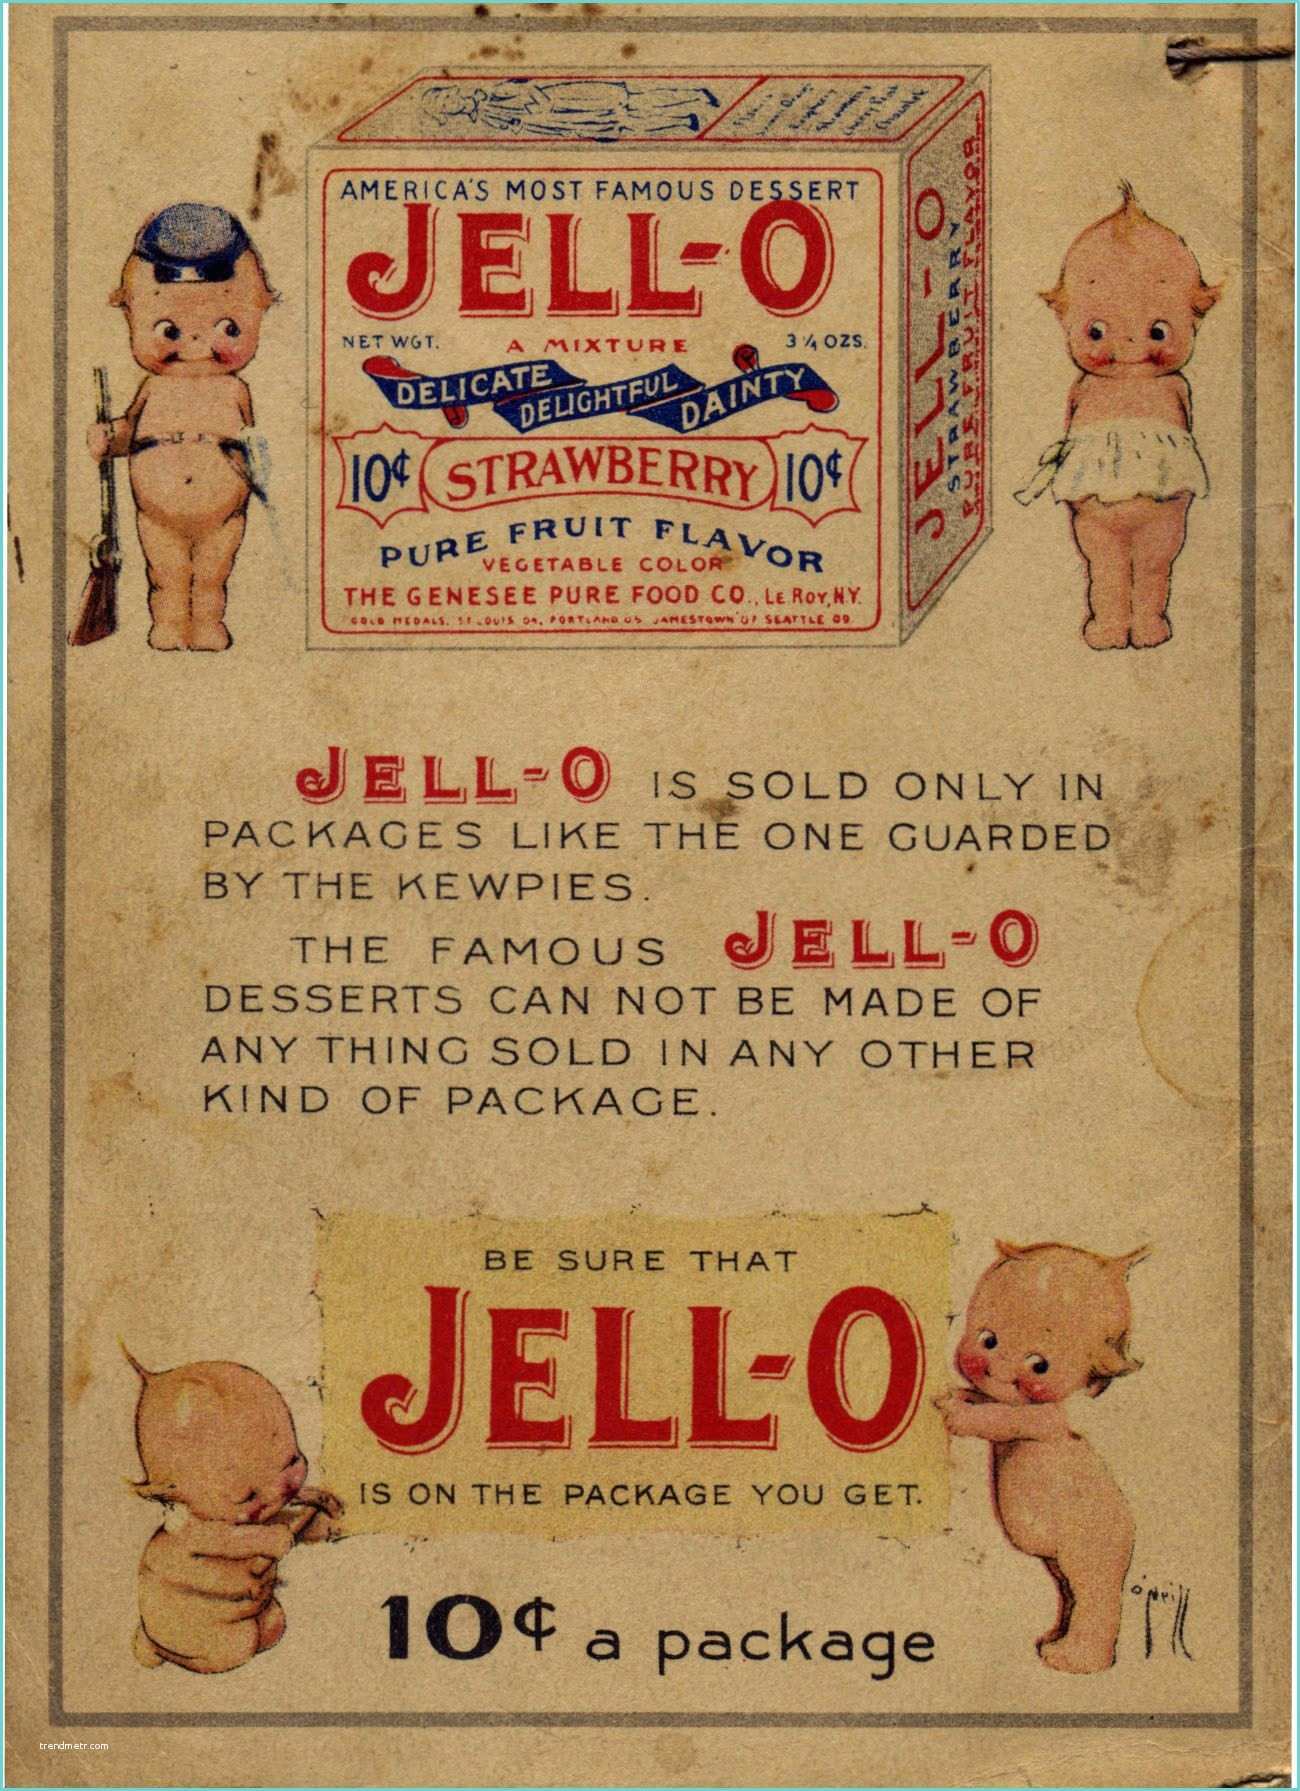 Allposters Return Policy Famous Jell O Desserts Cannot Be Made by Anything sold In Any Other